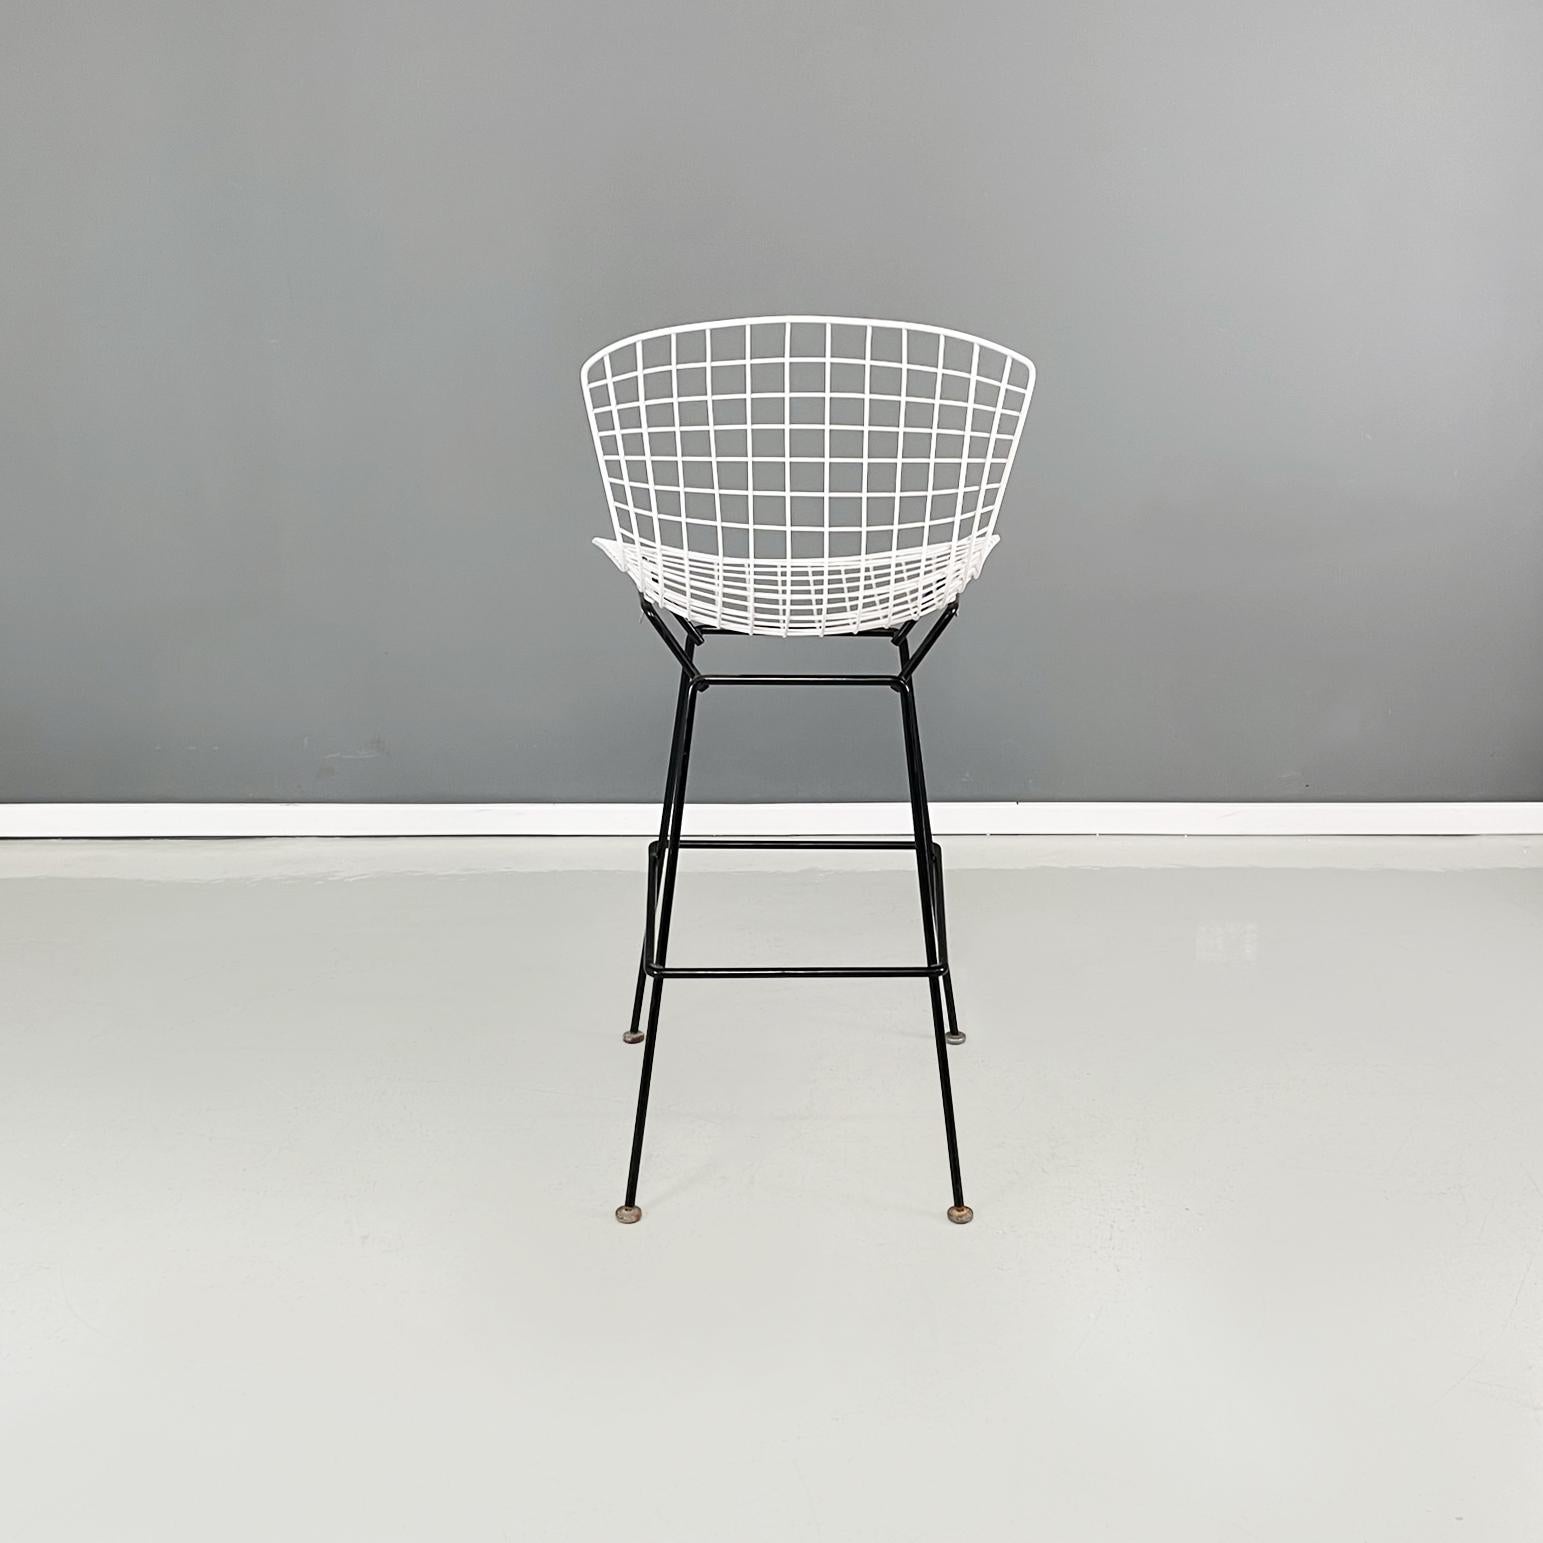 Mid-20th Century American Midcentury Black White Metal High Stools by Bertoia for Knoll, 1960s For Sale